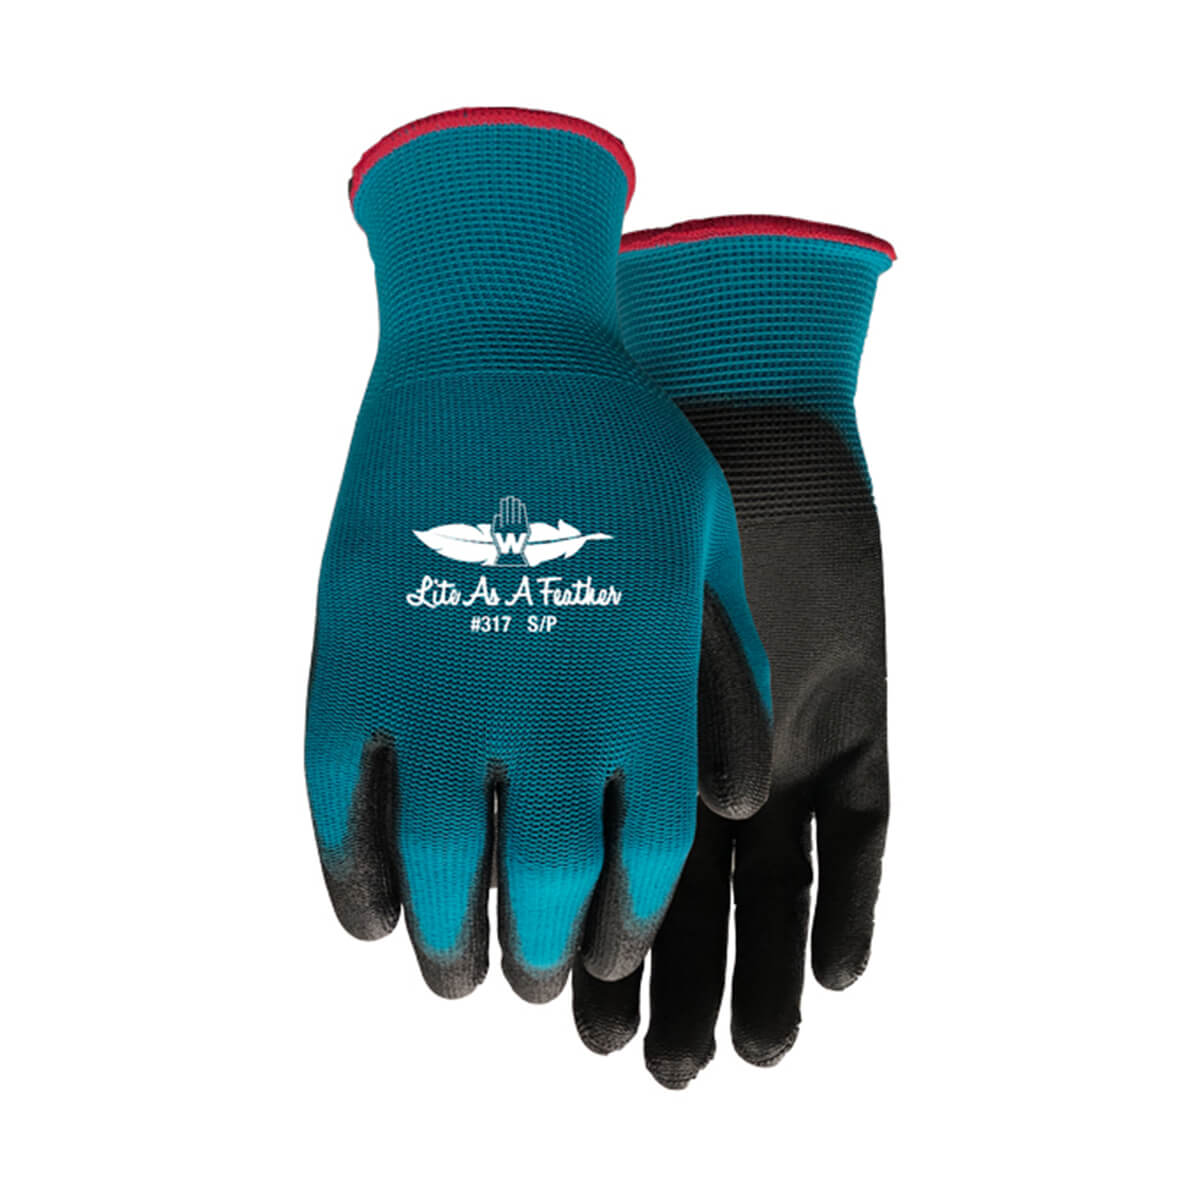 Ladies Lite As A Feather Glove